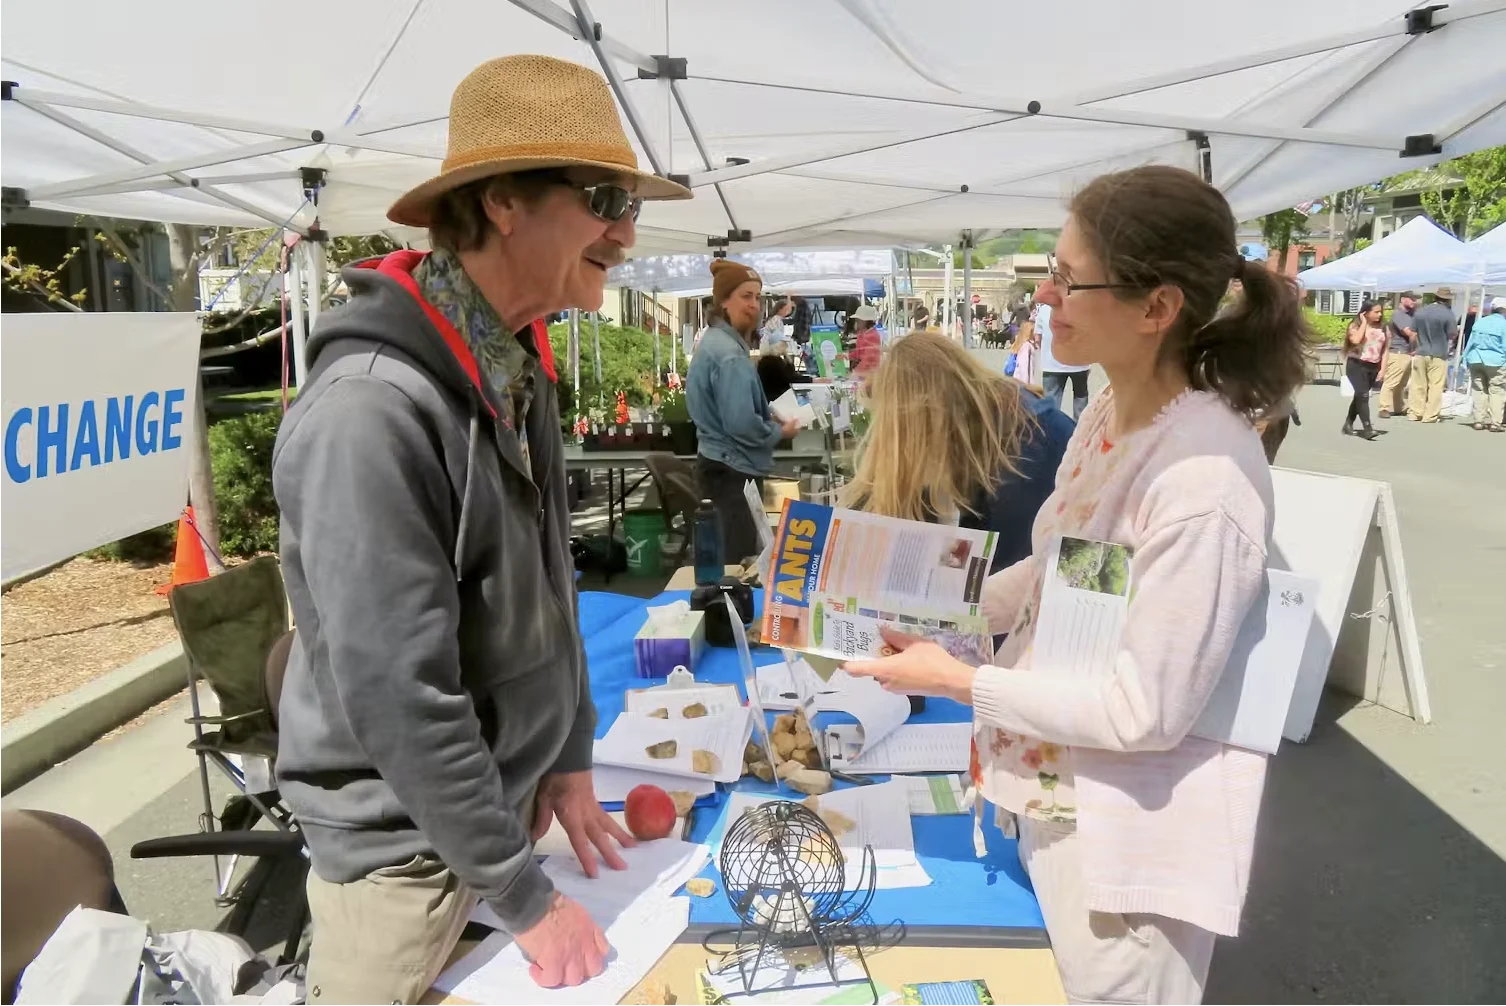 Public: Many climate activists are involved in education, like the Green Living Festival in Novato, Calif., shown in 2019, and outreach efforts such as collecting signatures for ballot measures and lobbying government officials. Fabrice Flori via Flickr, CC BY-SA